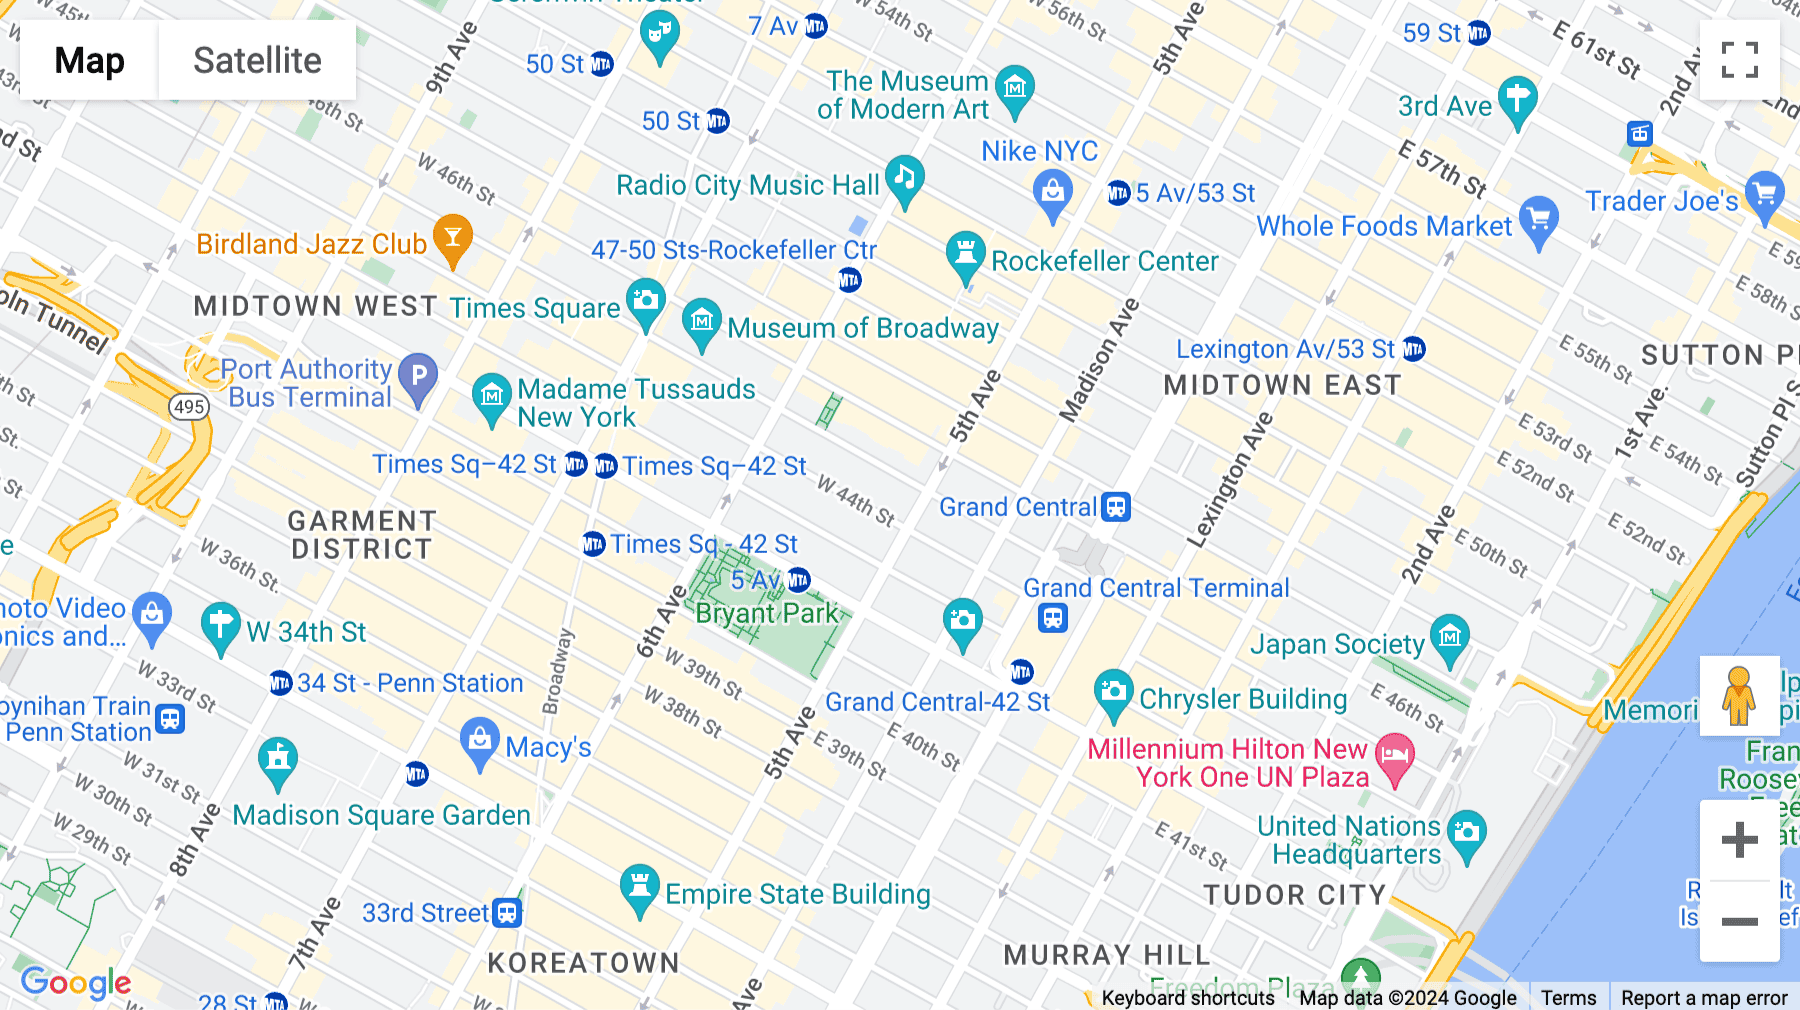 Click for interative map of 530 Fifth Avenue, New York City